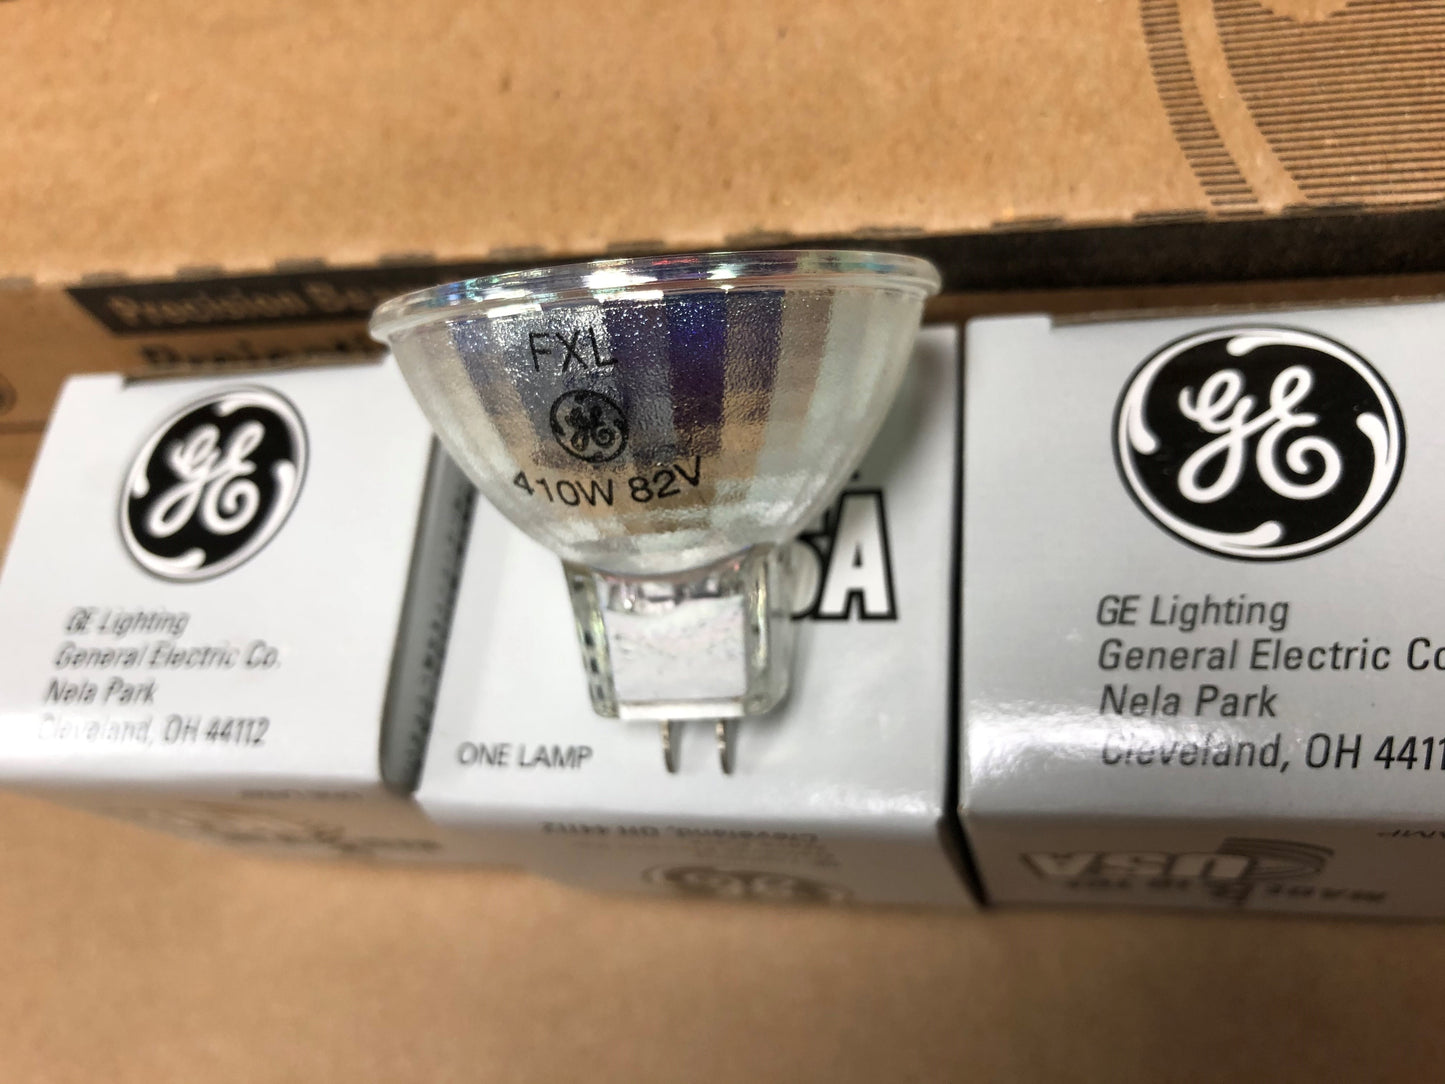 Brighten Every Presentation with Genuine General Electric FXL Projector Lamps